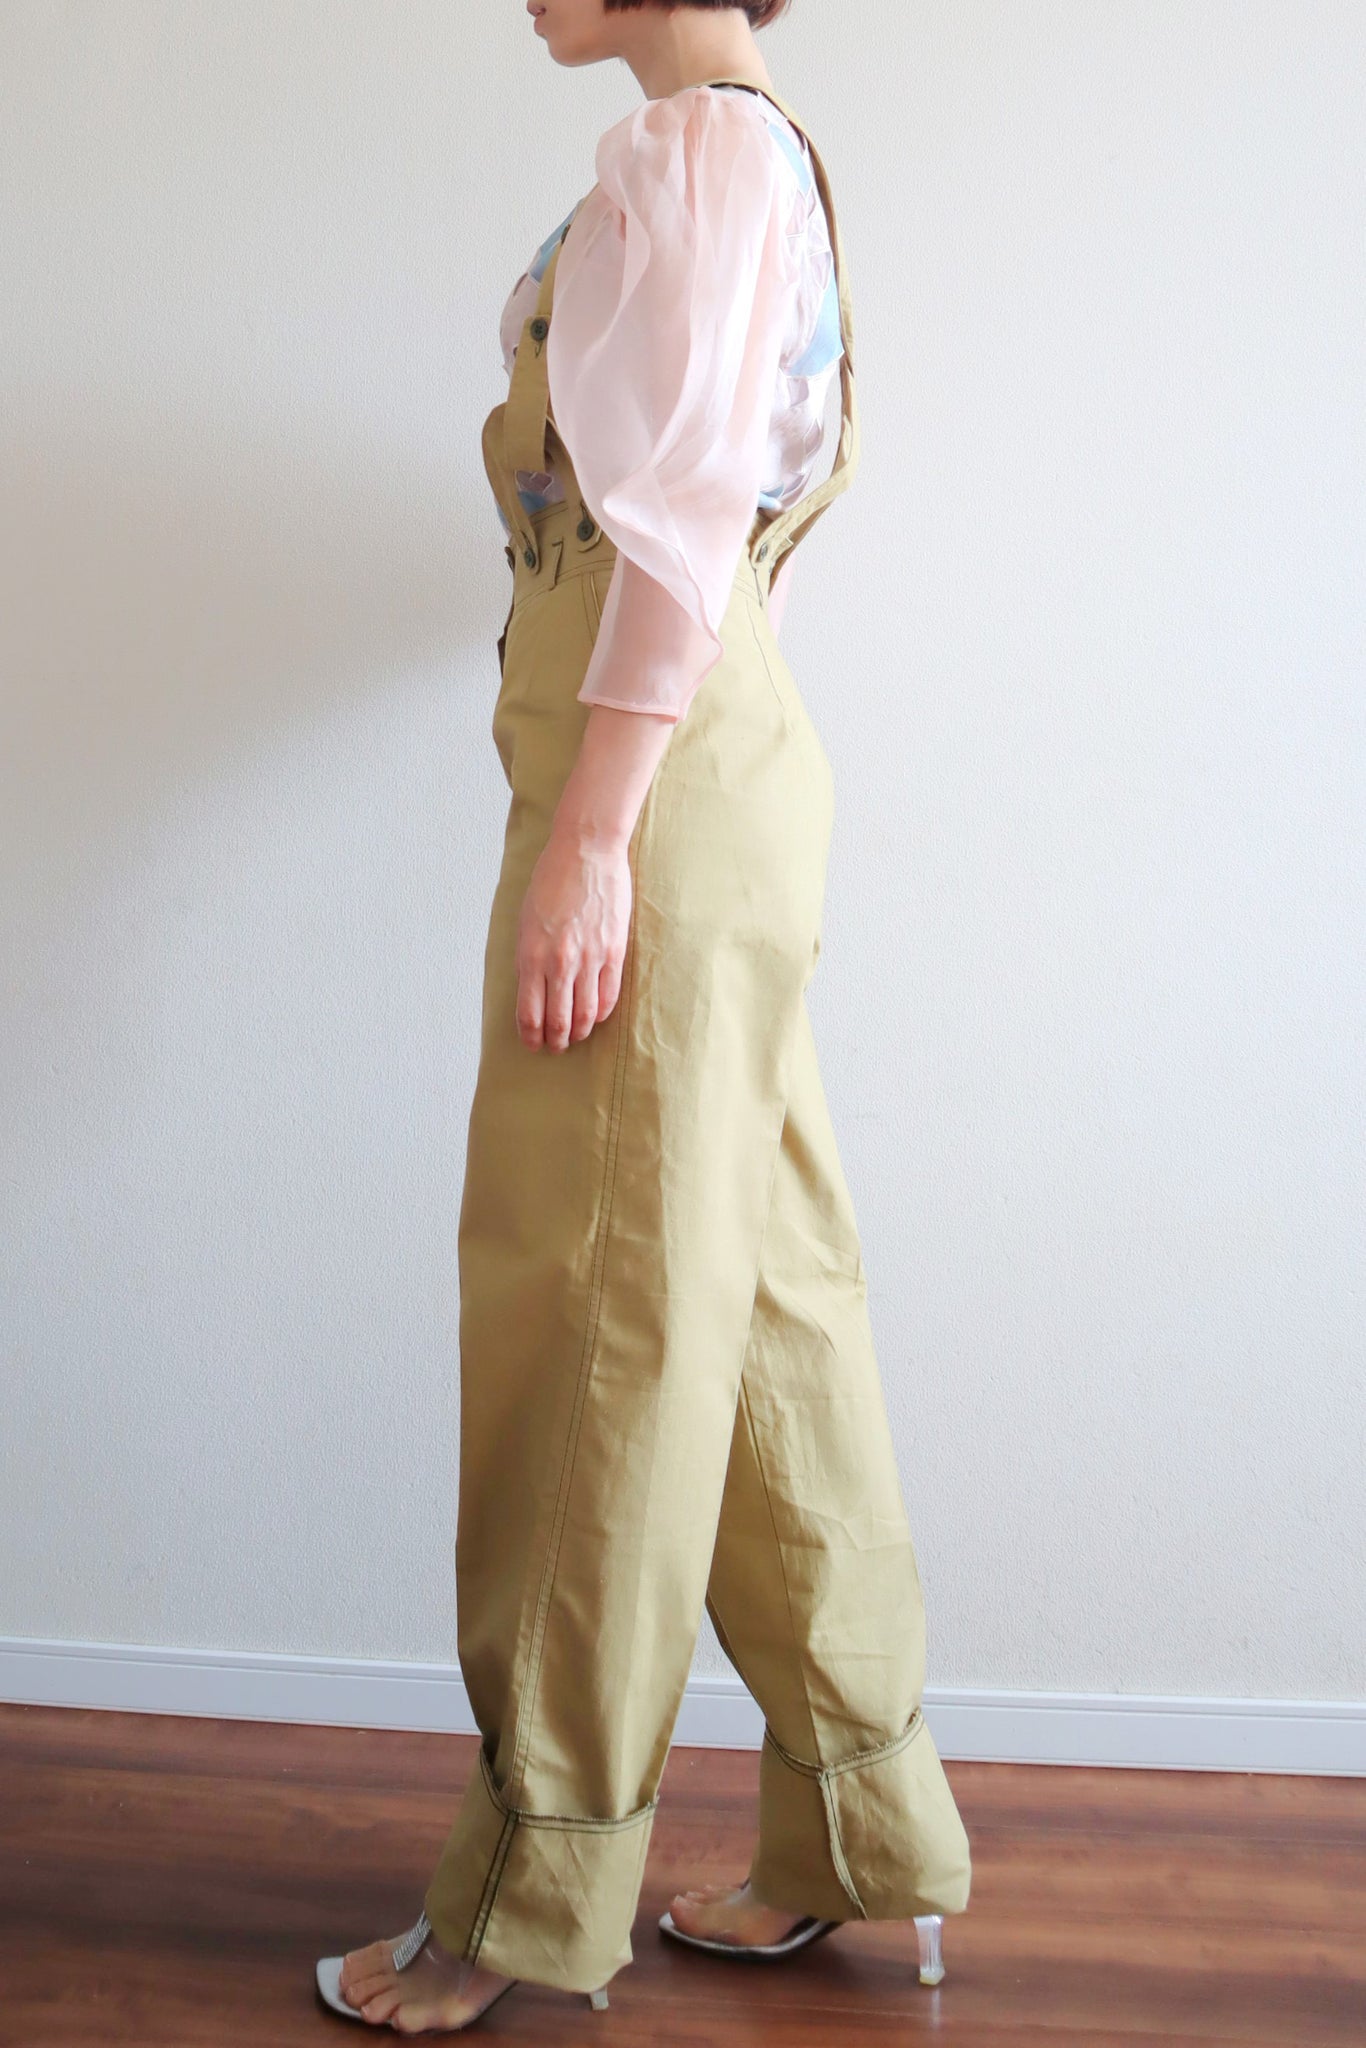 70s Deadstock French Made Overalls